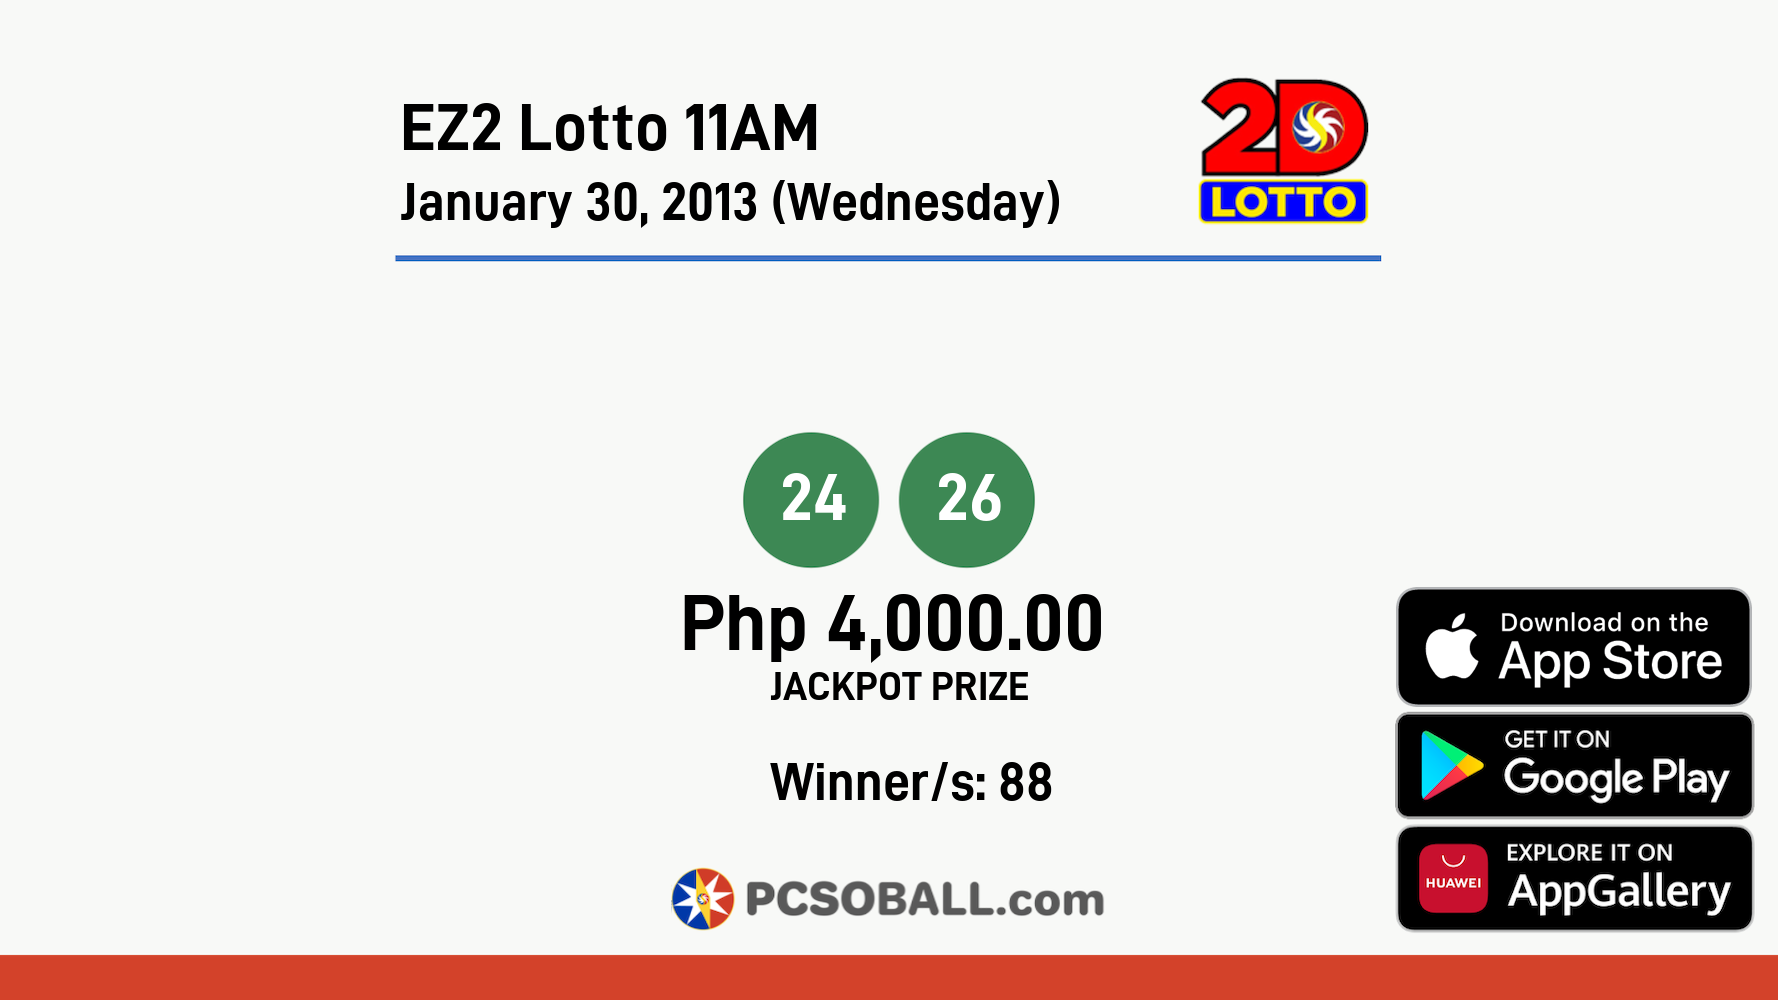 EZ2 Lotto 11AM January 30, 2013 (Wednesday) Result